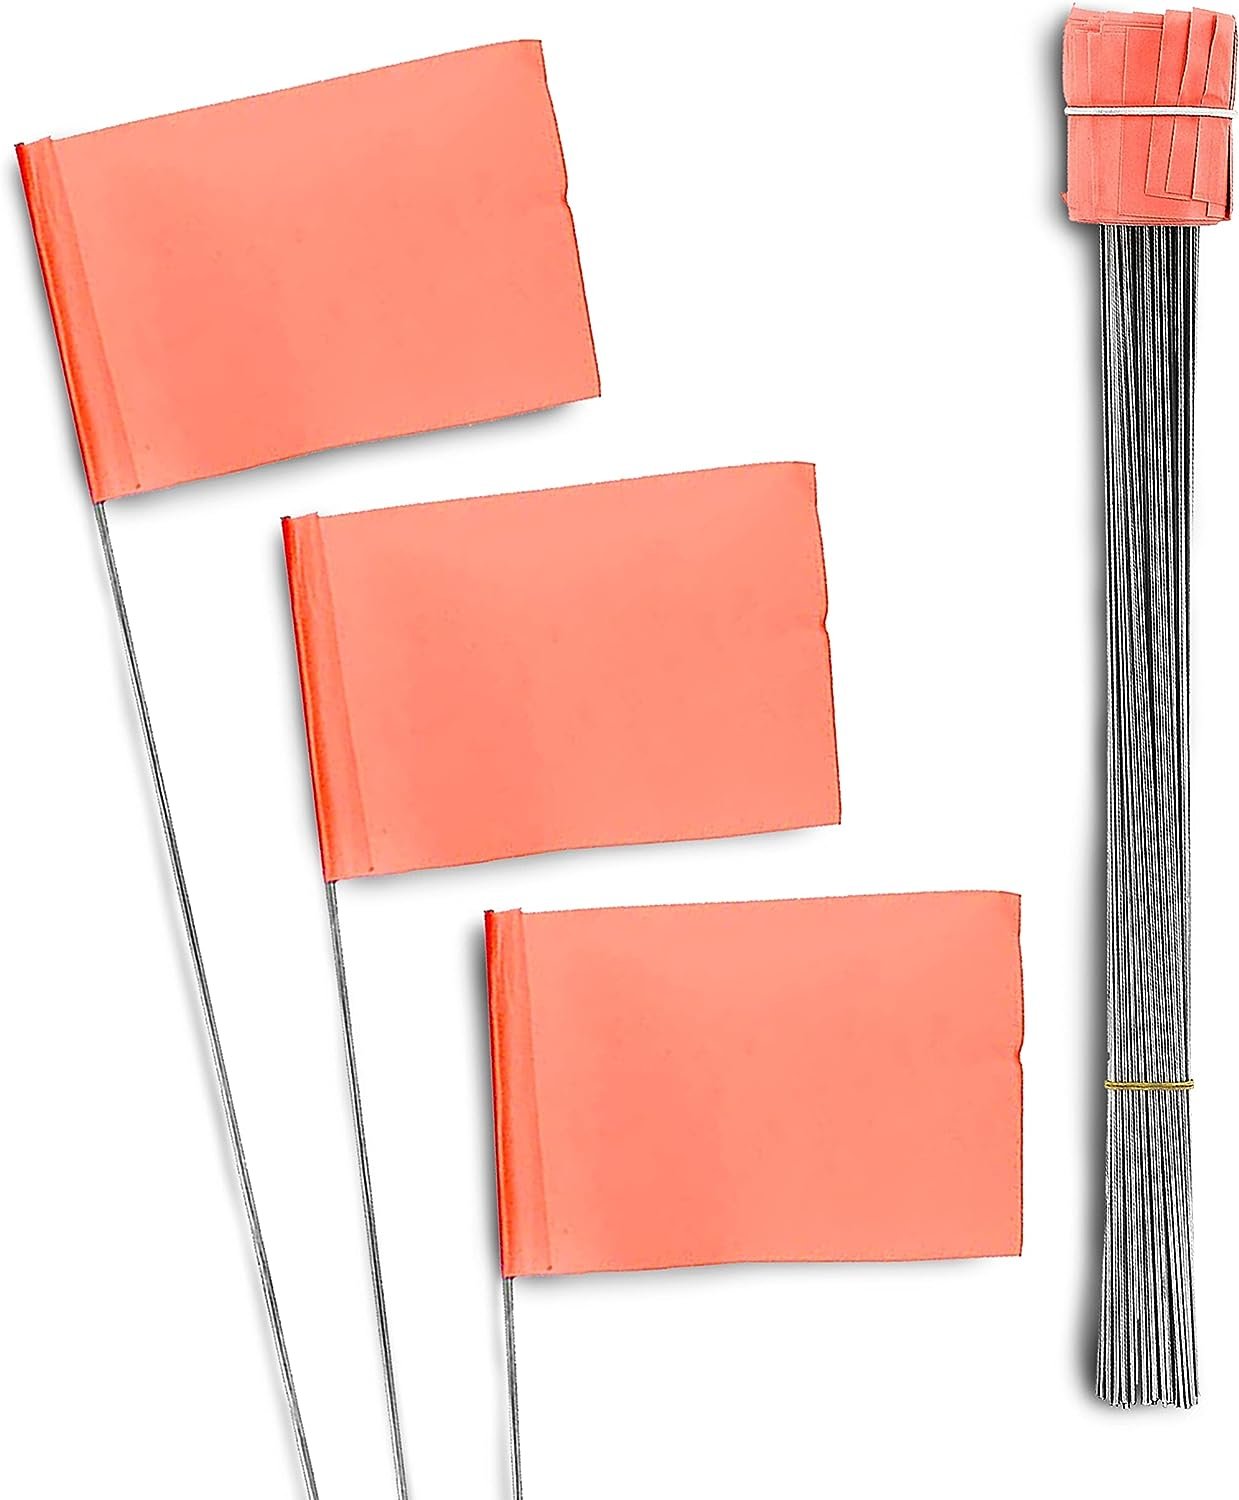 AdirPro Marking Flags 100 Pack - 2"x3" Lawn Flags - Marker Flags - Small & Thin Survey Flags - Flag Markers for Yard - Great for Ground Flags, Lawn Flags, Garden Flag Markers, Boundry Flags (Orange)